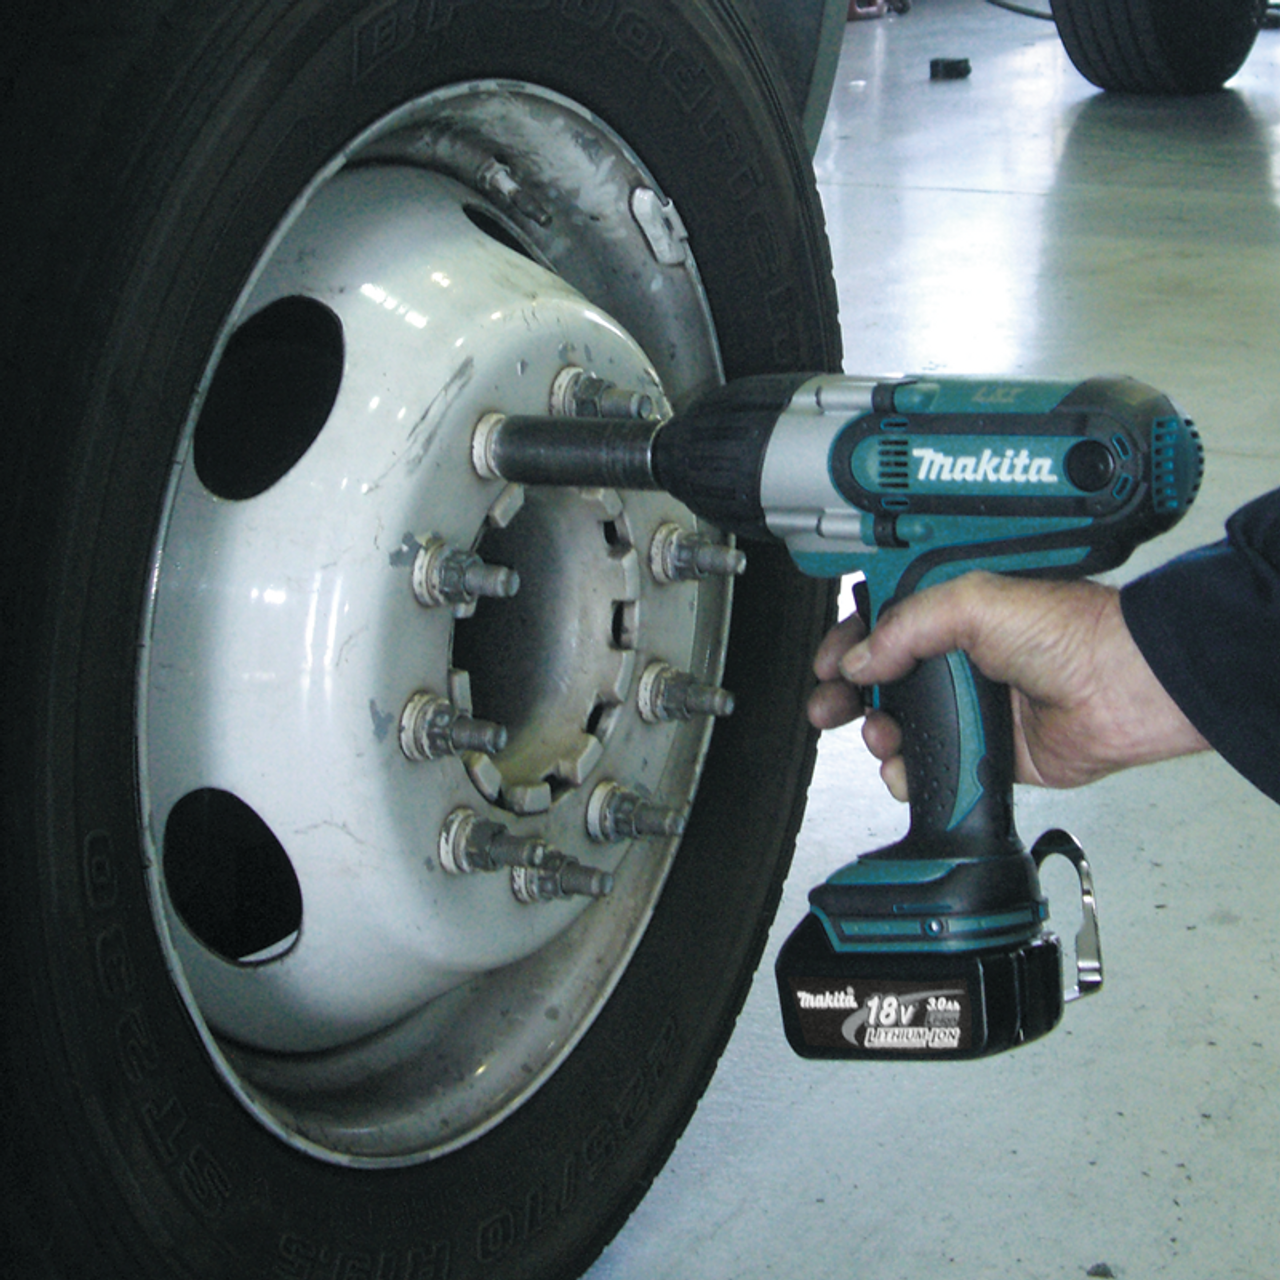 18V LXT? Lithium-Ion Cordless 1/2" Sq. Drive Impact Wrench Kit (3.0Ah), Makita-built motor delivers, XWT041X